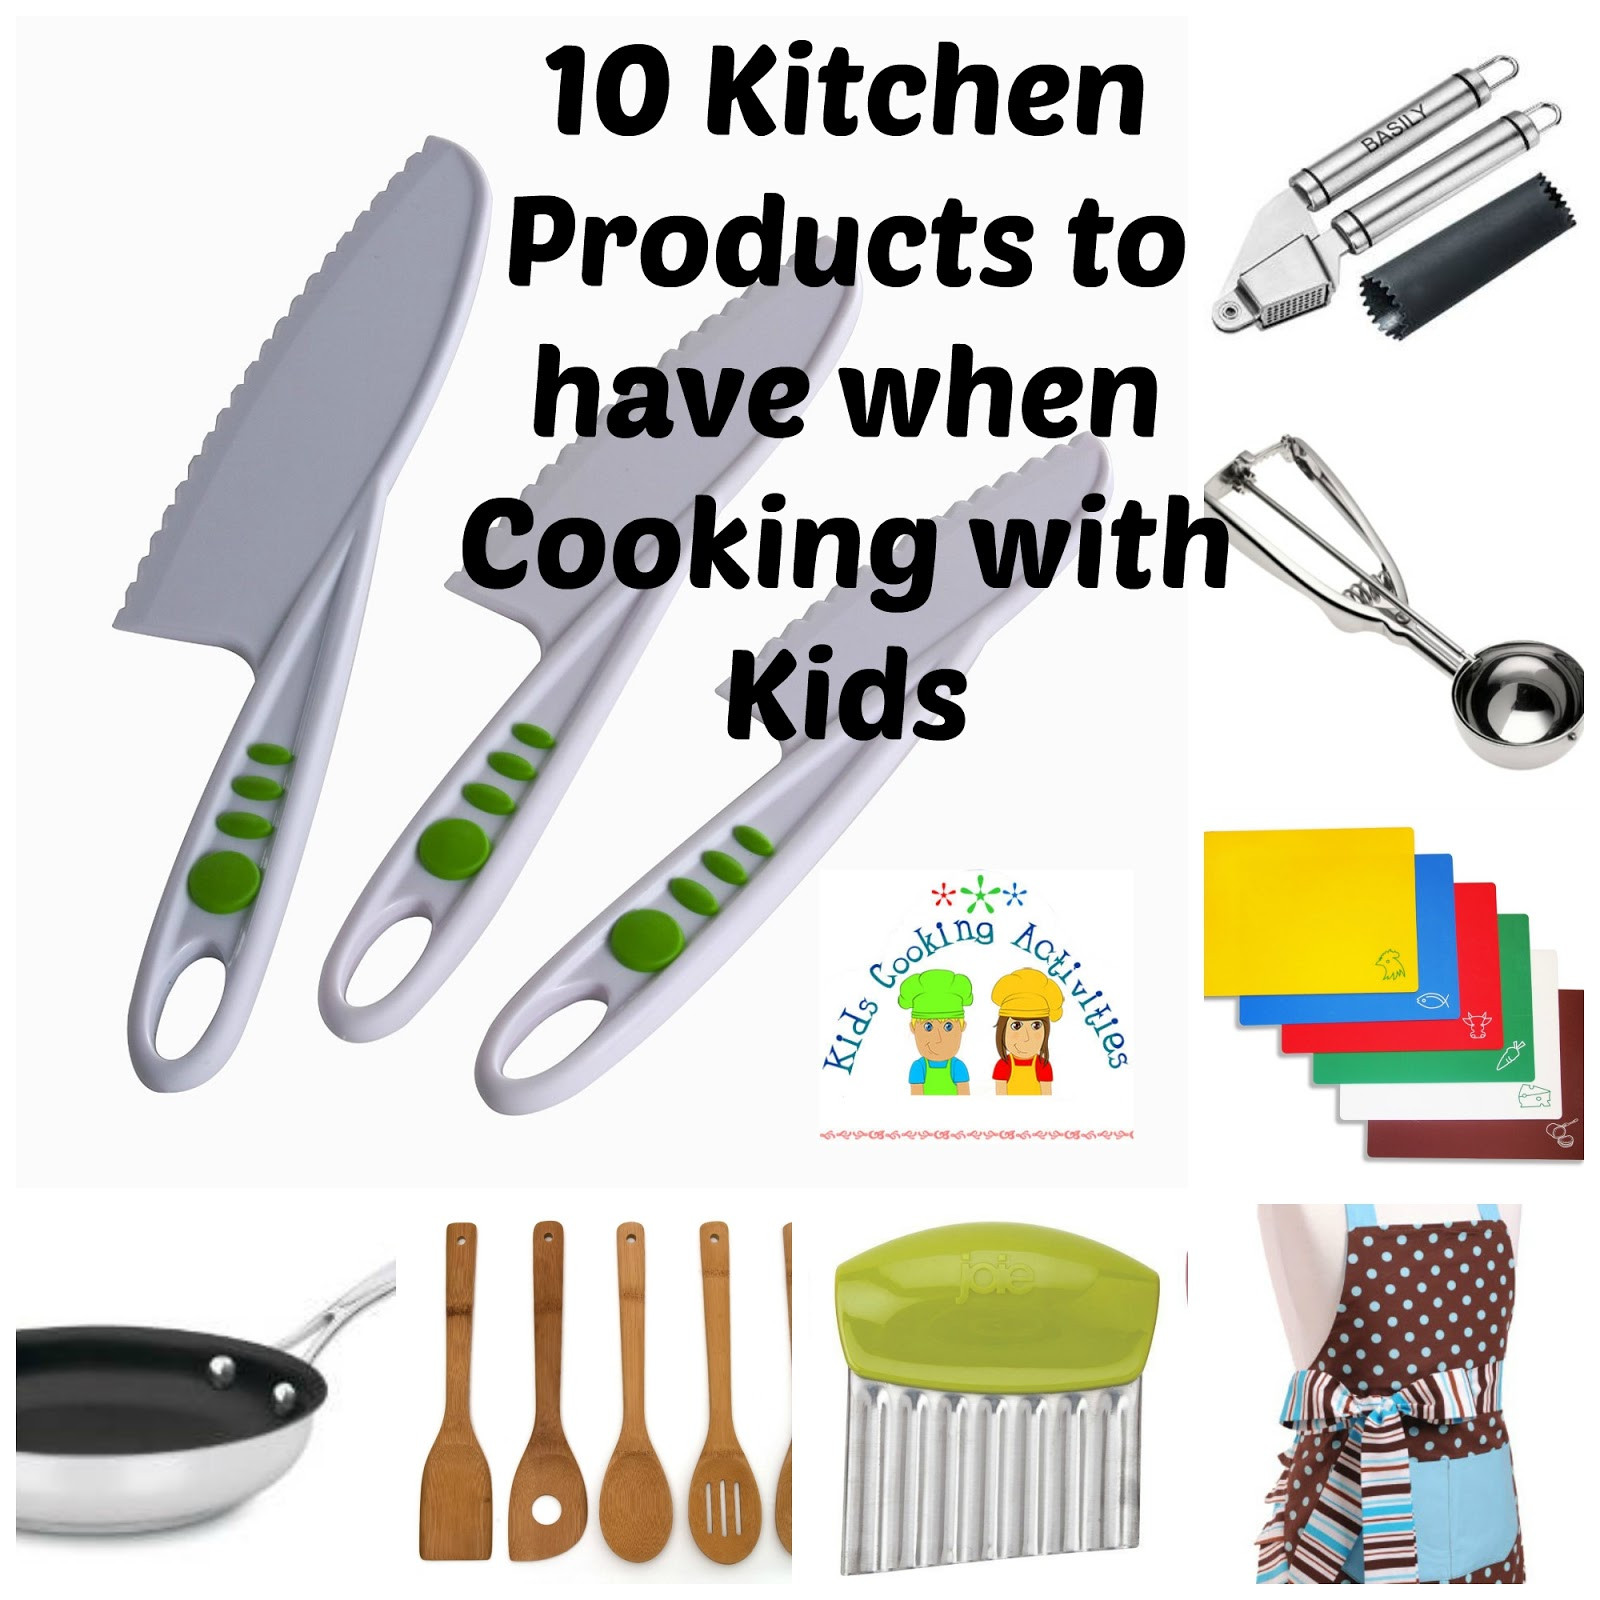 Kids Cooking Gift Ideas
 5 Holiday Gift Ideas for Children